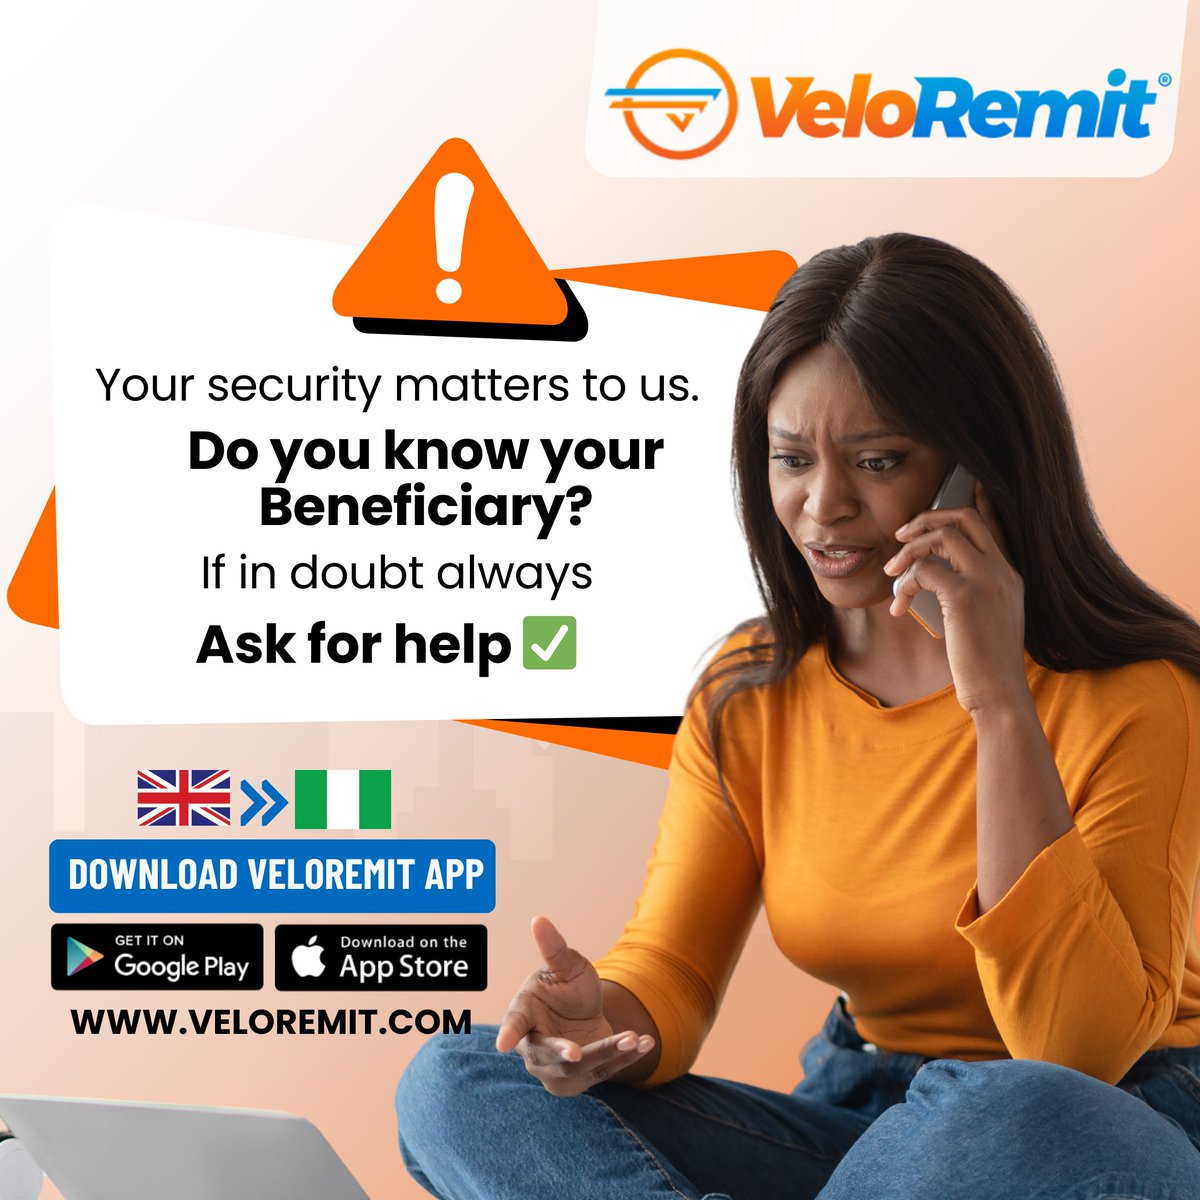 🔒Your security matters to us at VeloRemit! Always know your beneficiary before sending money.🇬🇧🇳🇬 When in doubt, do not hesitate to ask for help. #veloremit #securitymatters #beneficiaries #StaySafe #peaceofmind #secure #nigeriansinuk #etioba_velo✅ #downloadnow